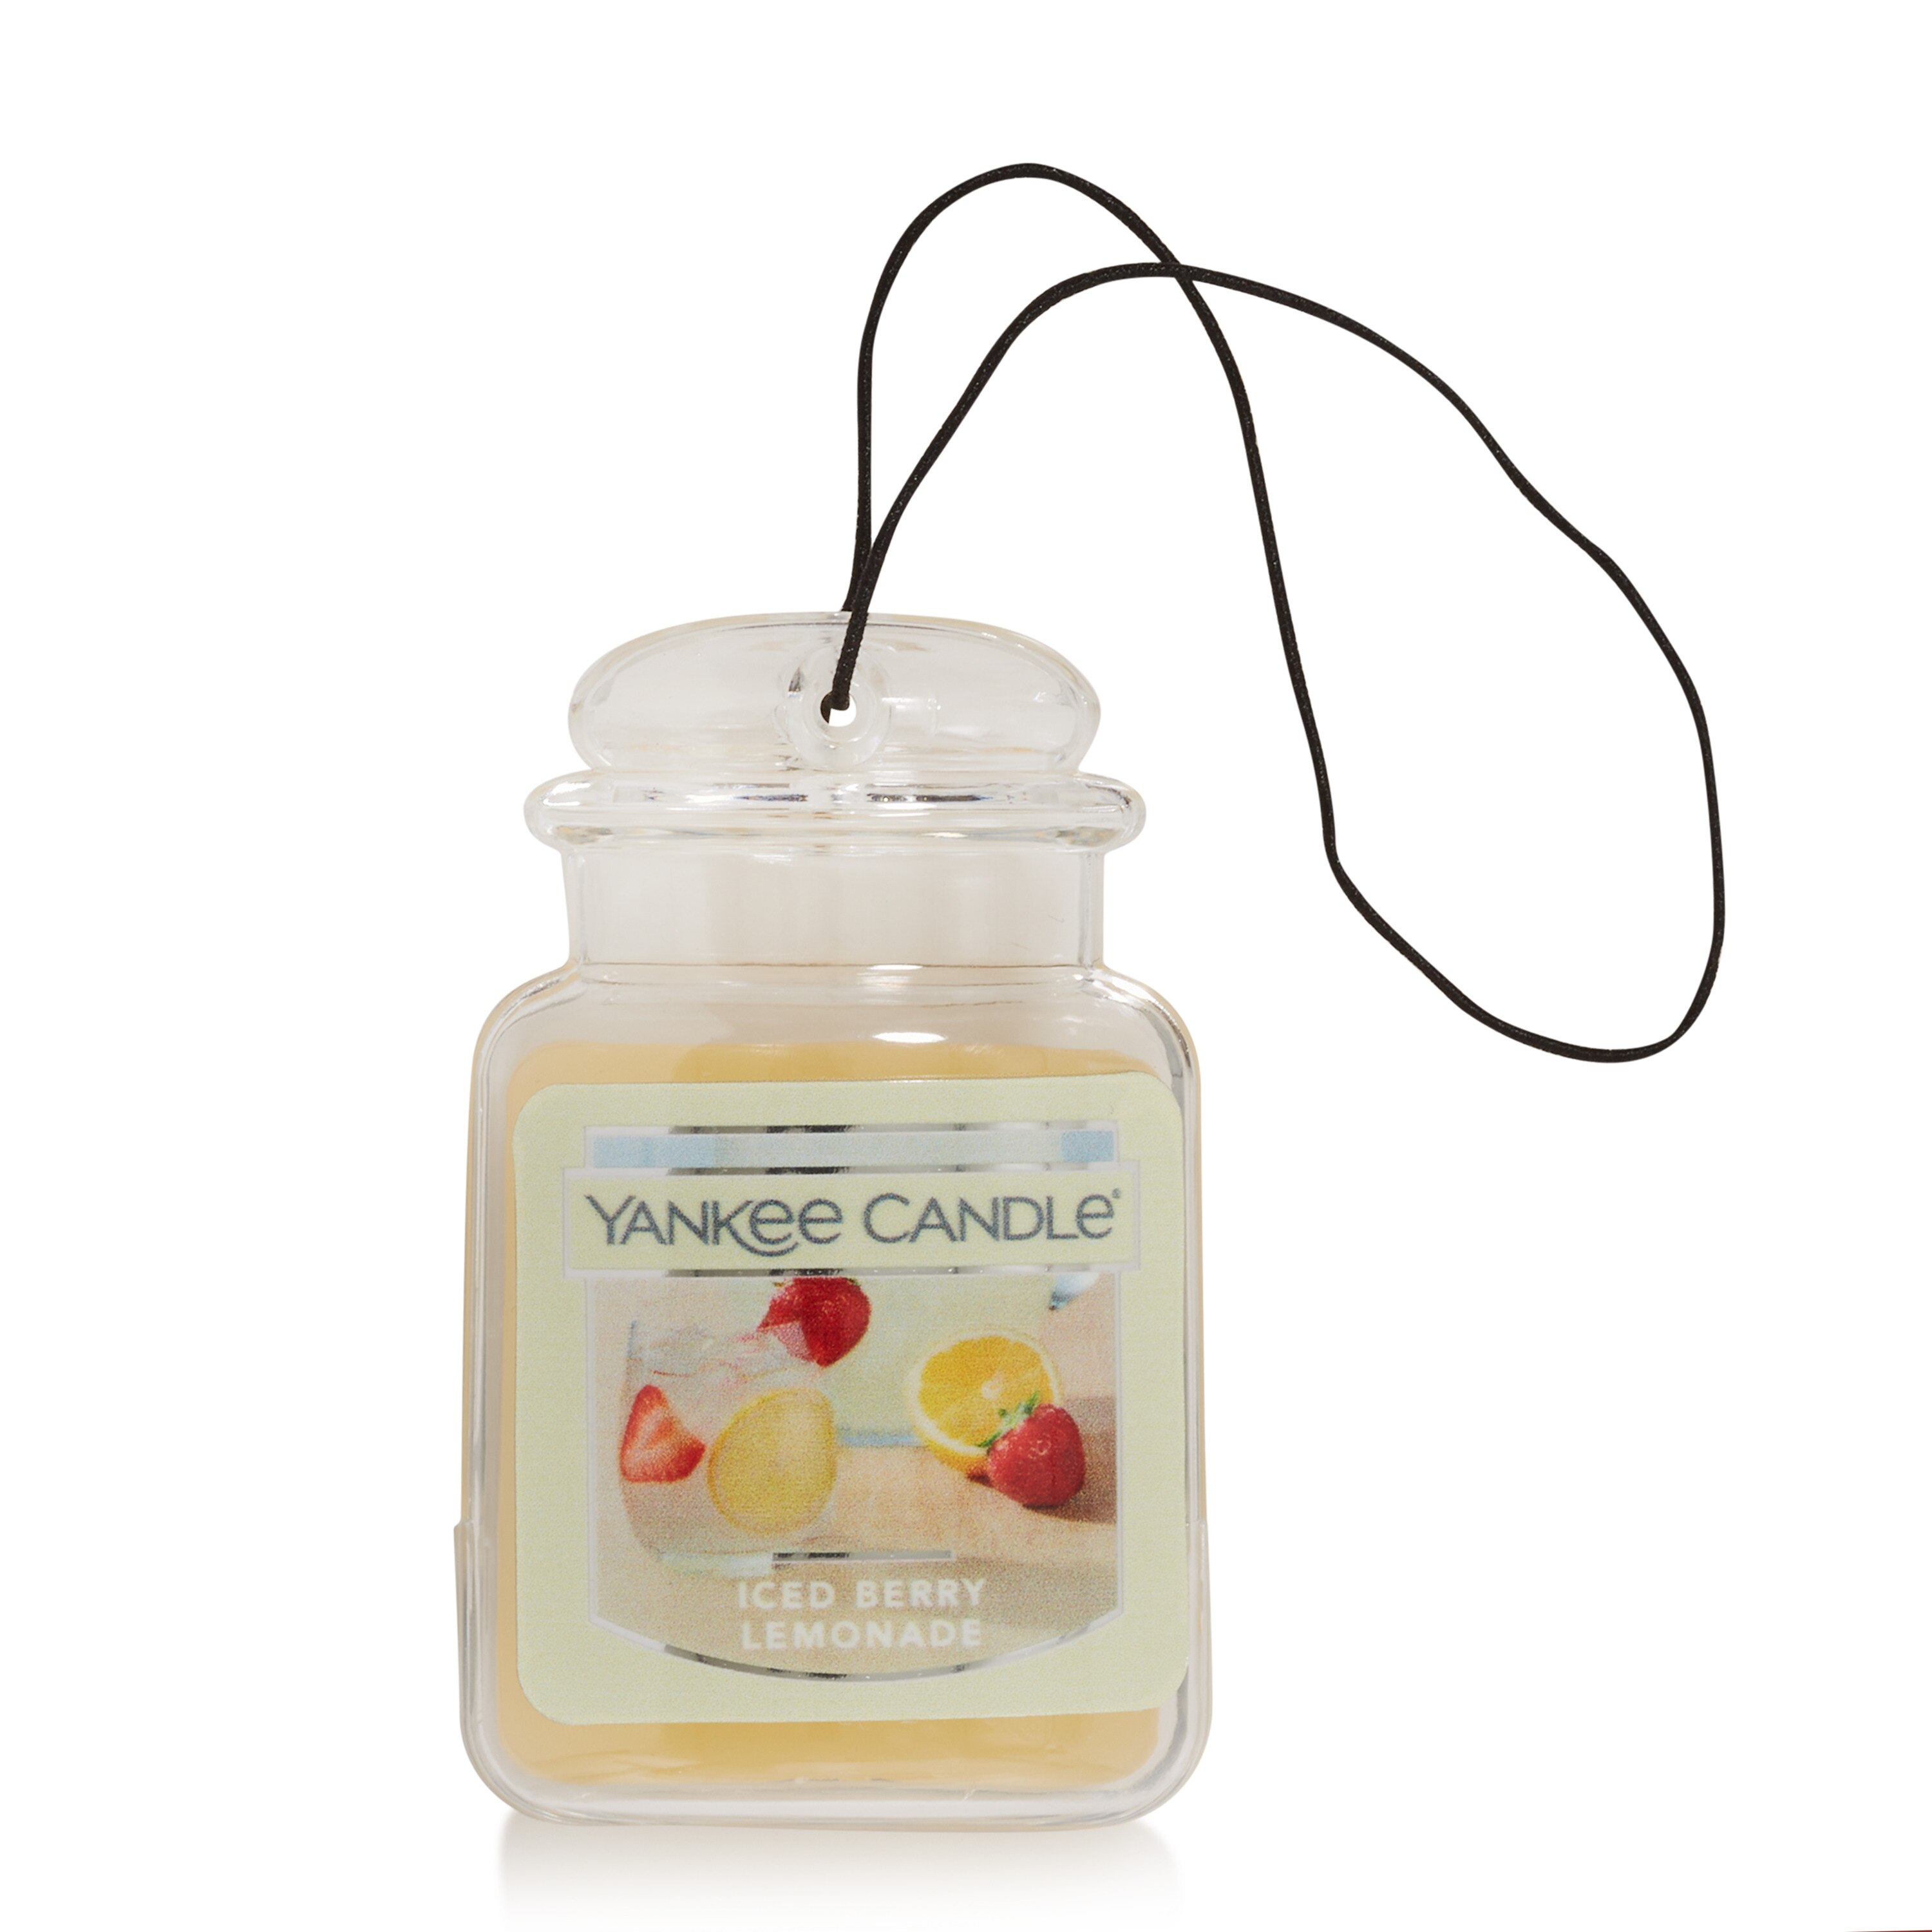 Customer Reviews: Yankee Candle Car Jar Ultimate Iced Berry